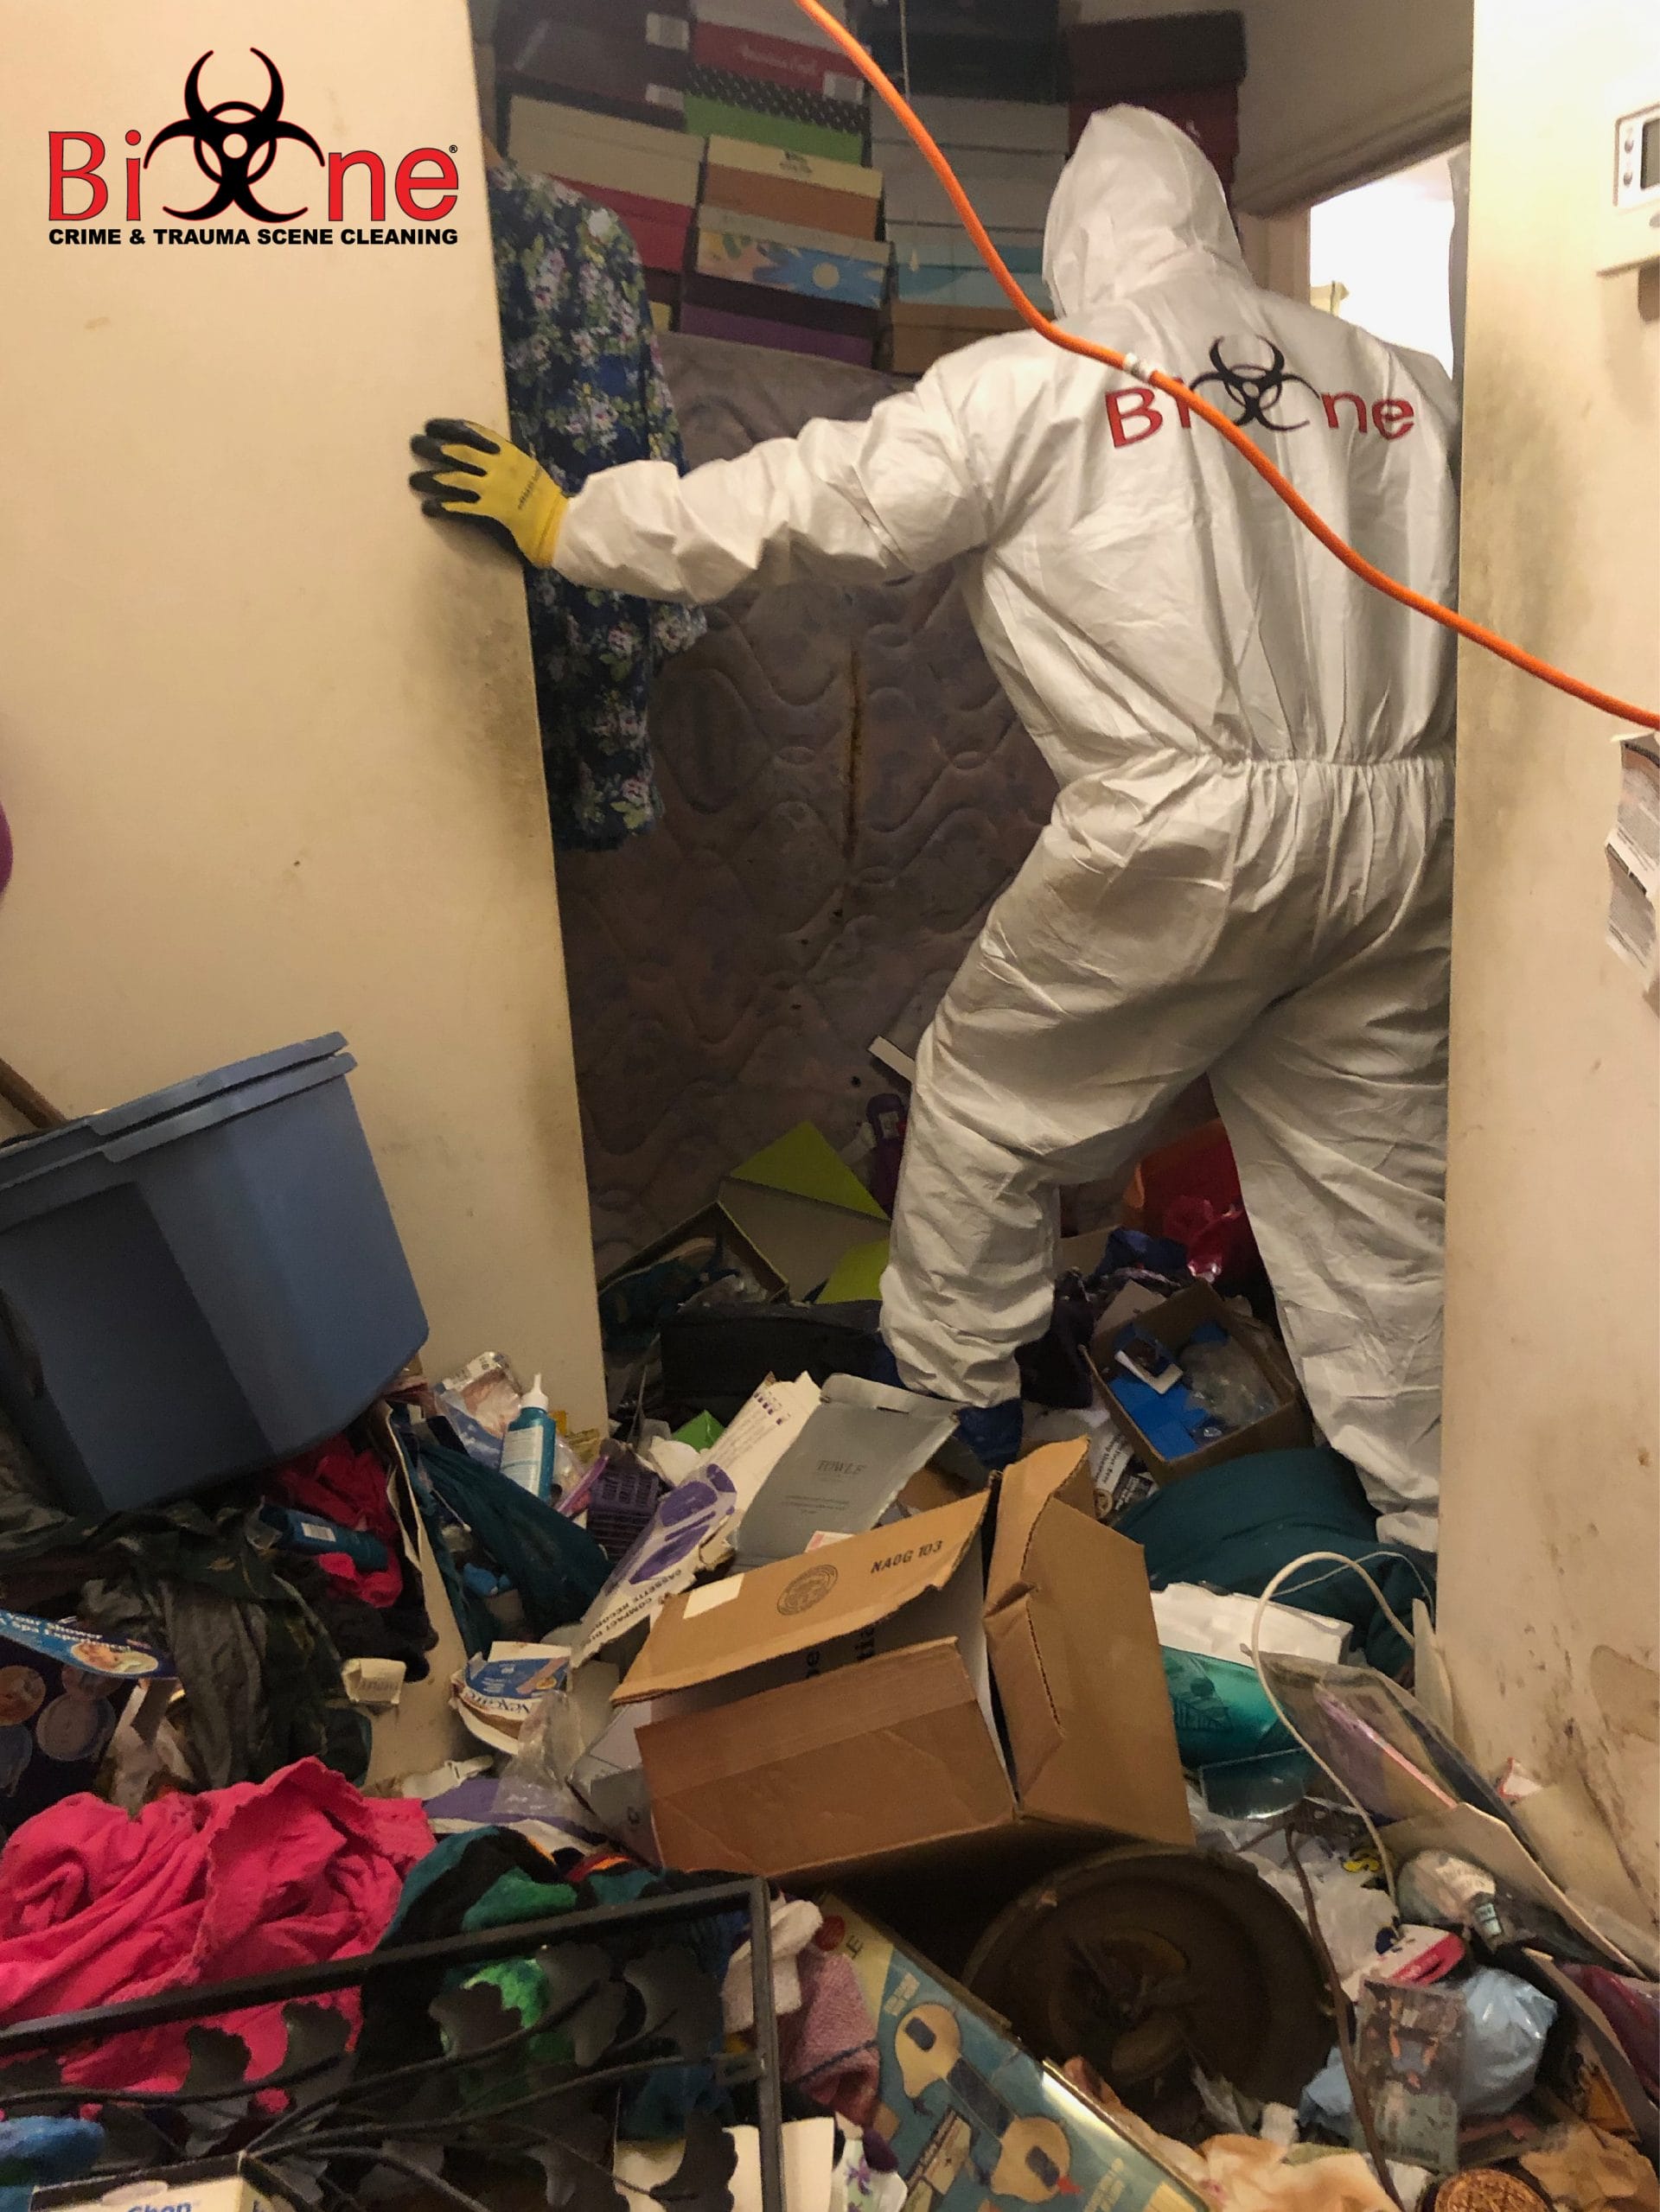 Hoarded properties pose multiple health and safety threats. Bio-One of St Paul specialists are ready to tackle these scenarios with care, compassion, and discretion.